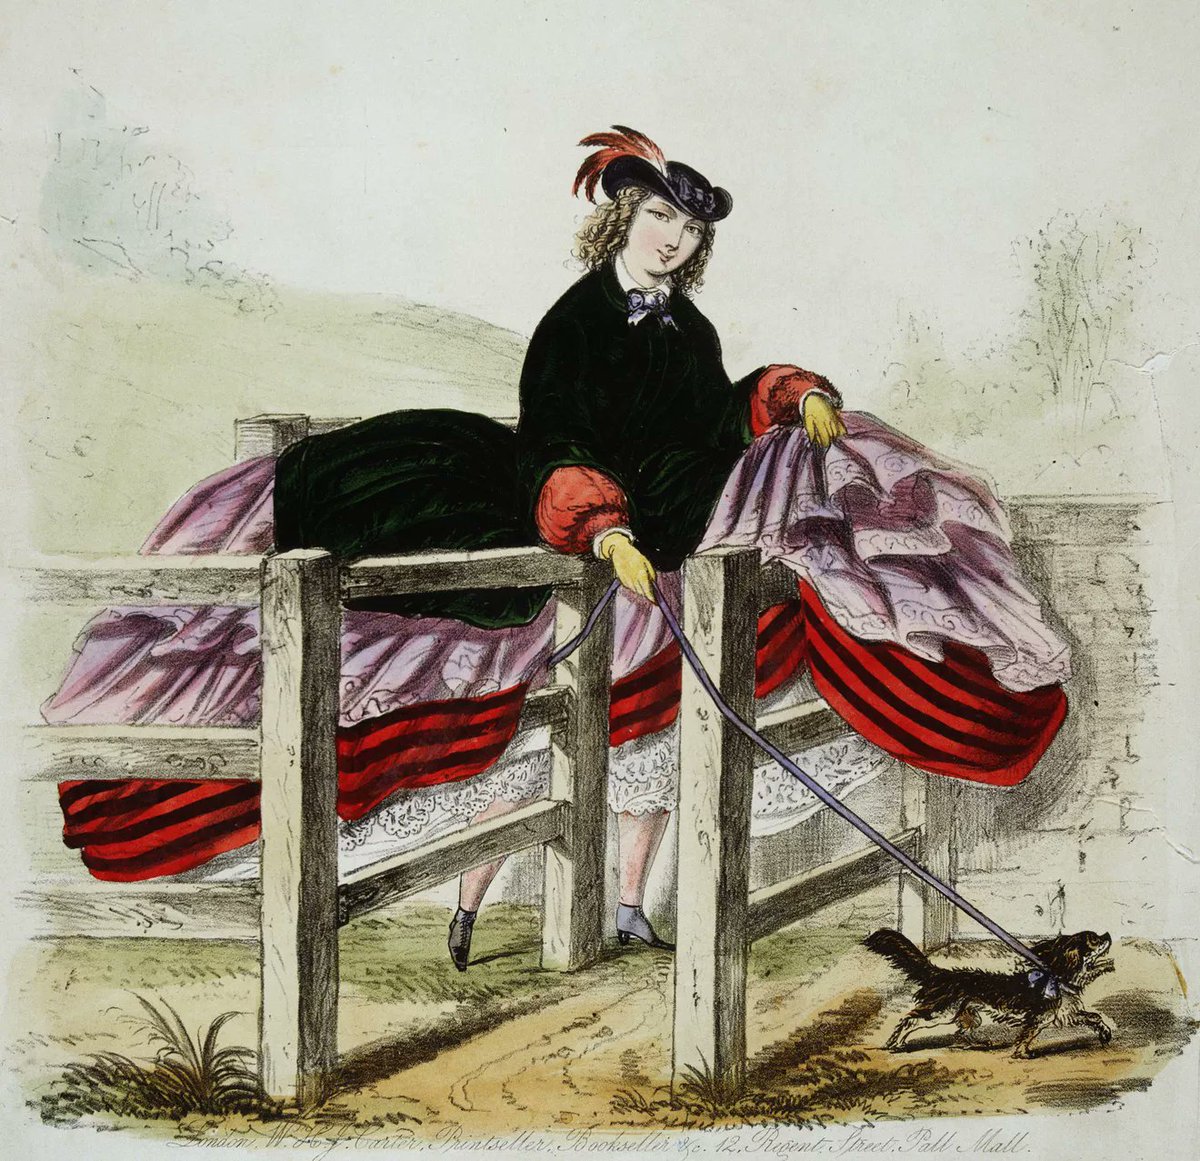 However, it was a fact that the size of the crinoline often caused difficulties in passing through doors, boarding carriages and generally moving about.